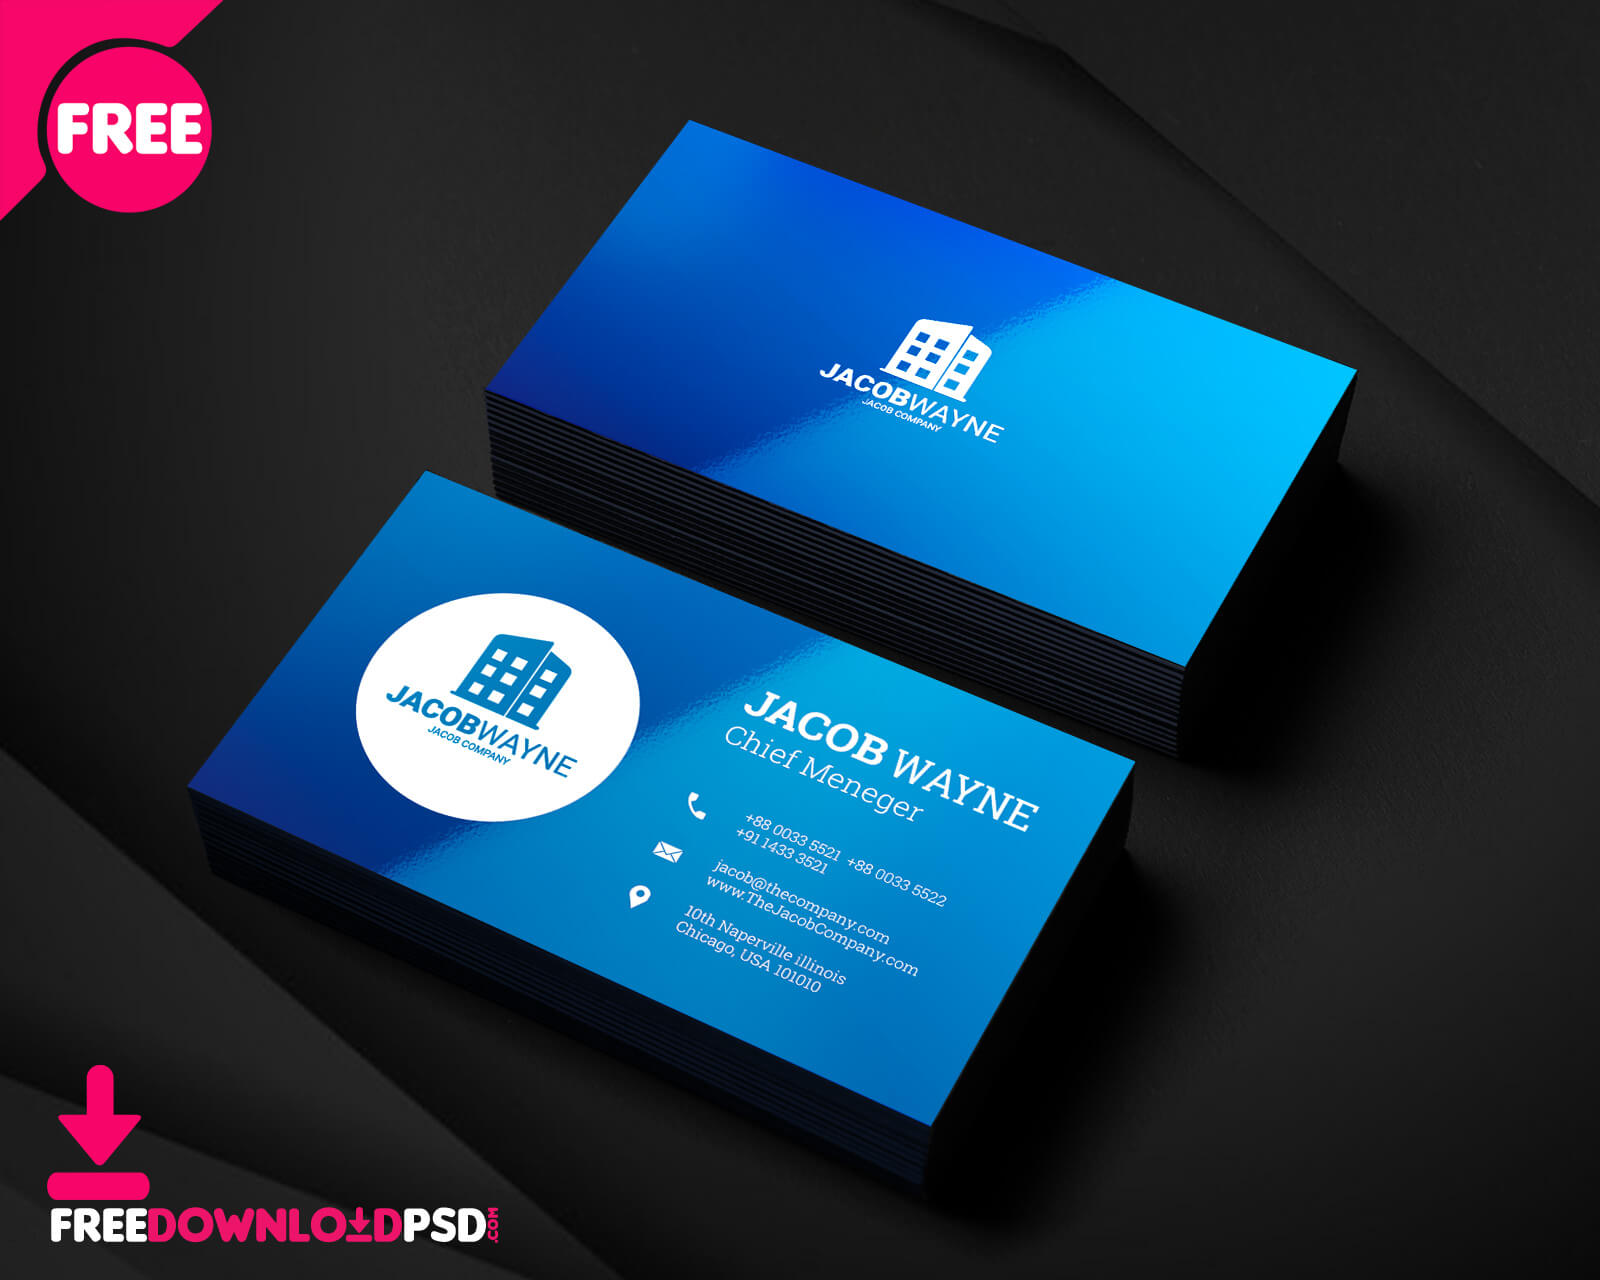 Real Estate Business Card Psd | Freedownloadpsd Inside Calling Card Template Psd